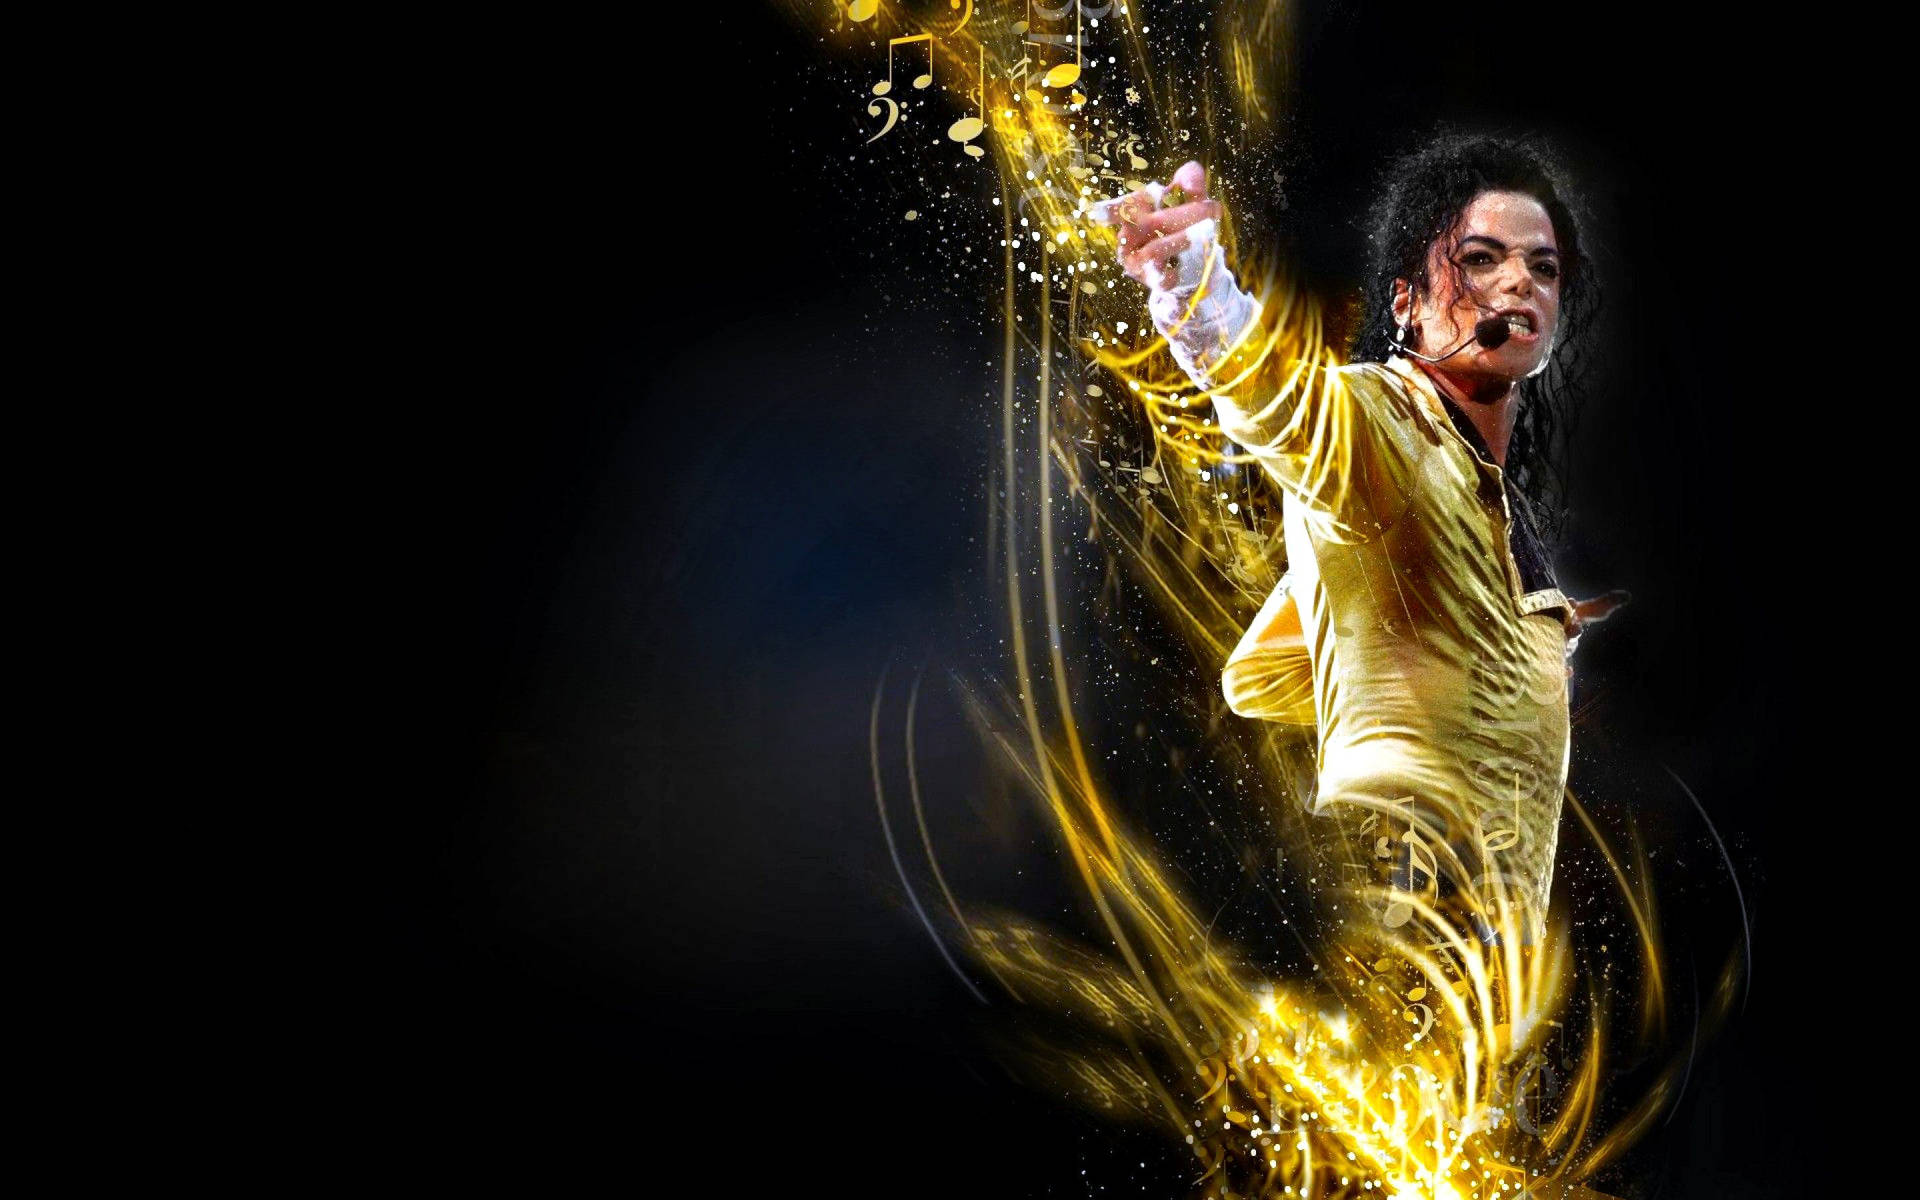 Michael Jackson In Gold-plated Outfit